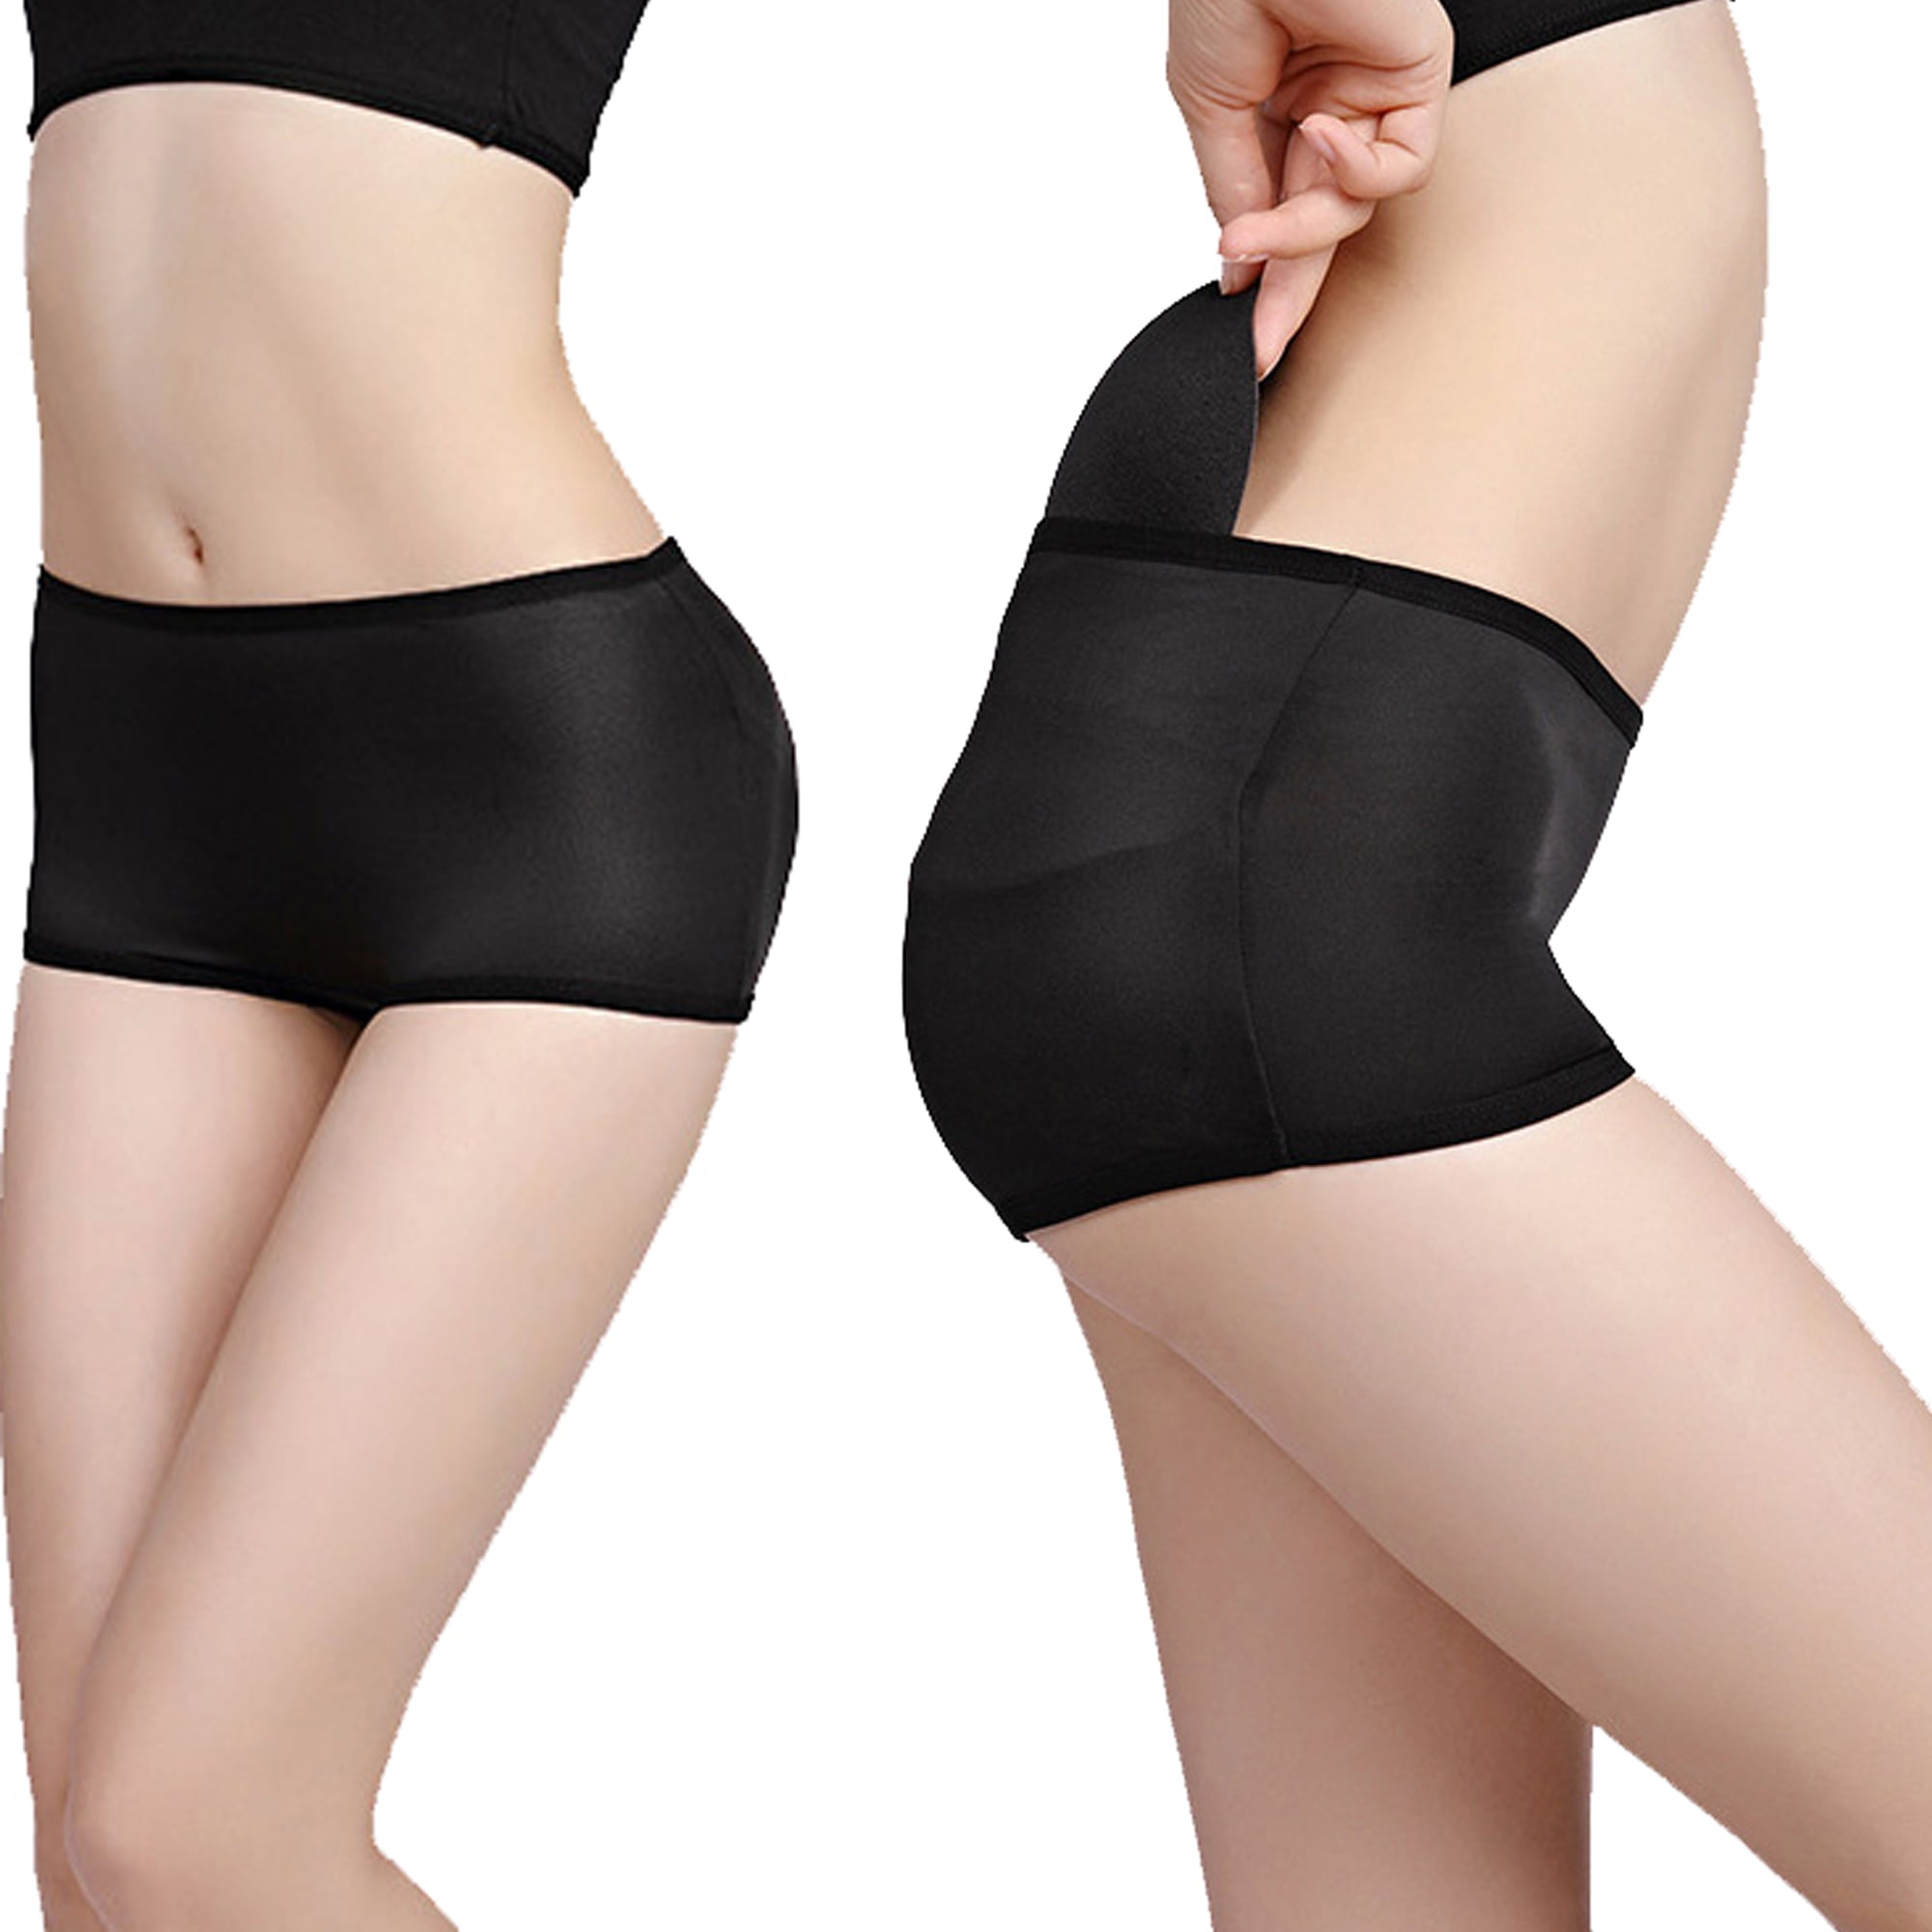 Low-Rise Lift the Hip Back Butt Booster Padded Panties - Removable foam pads-S-Black  